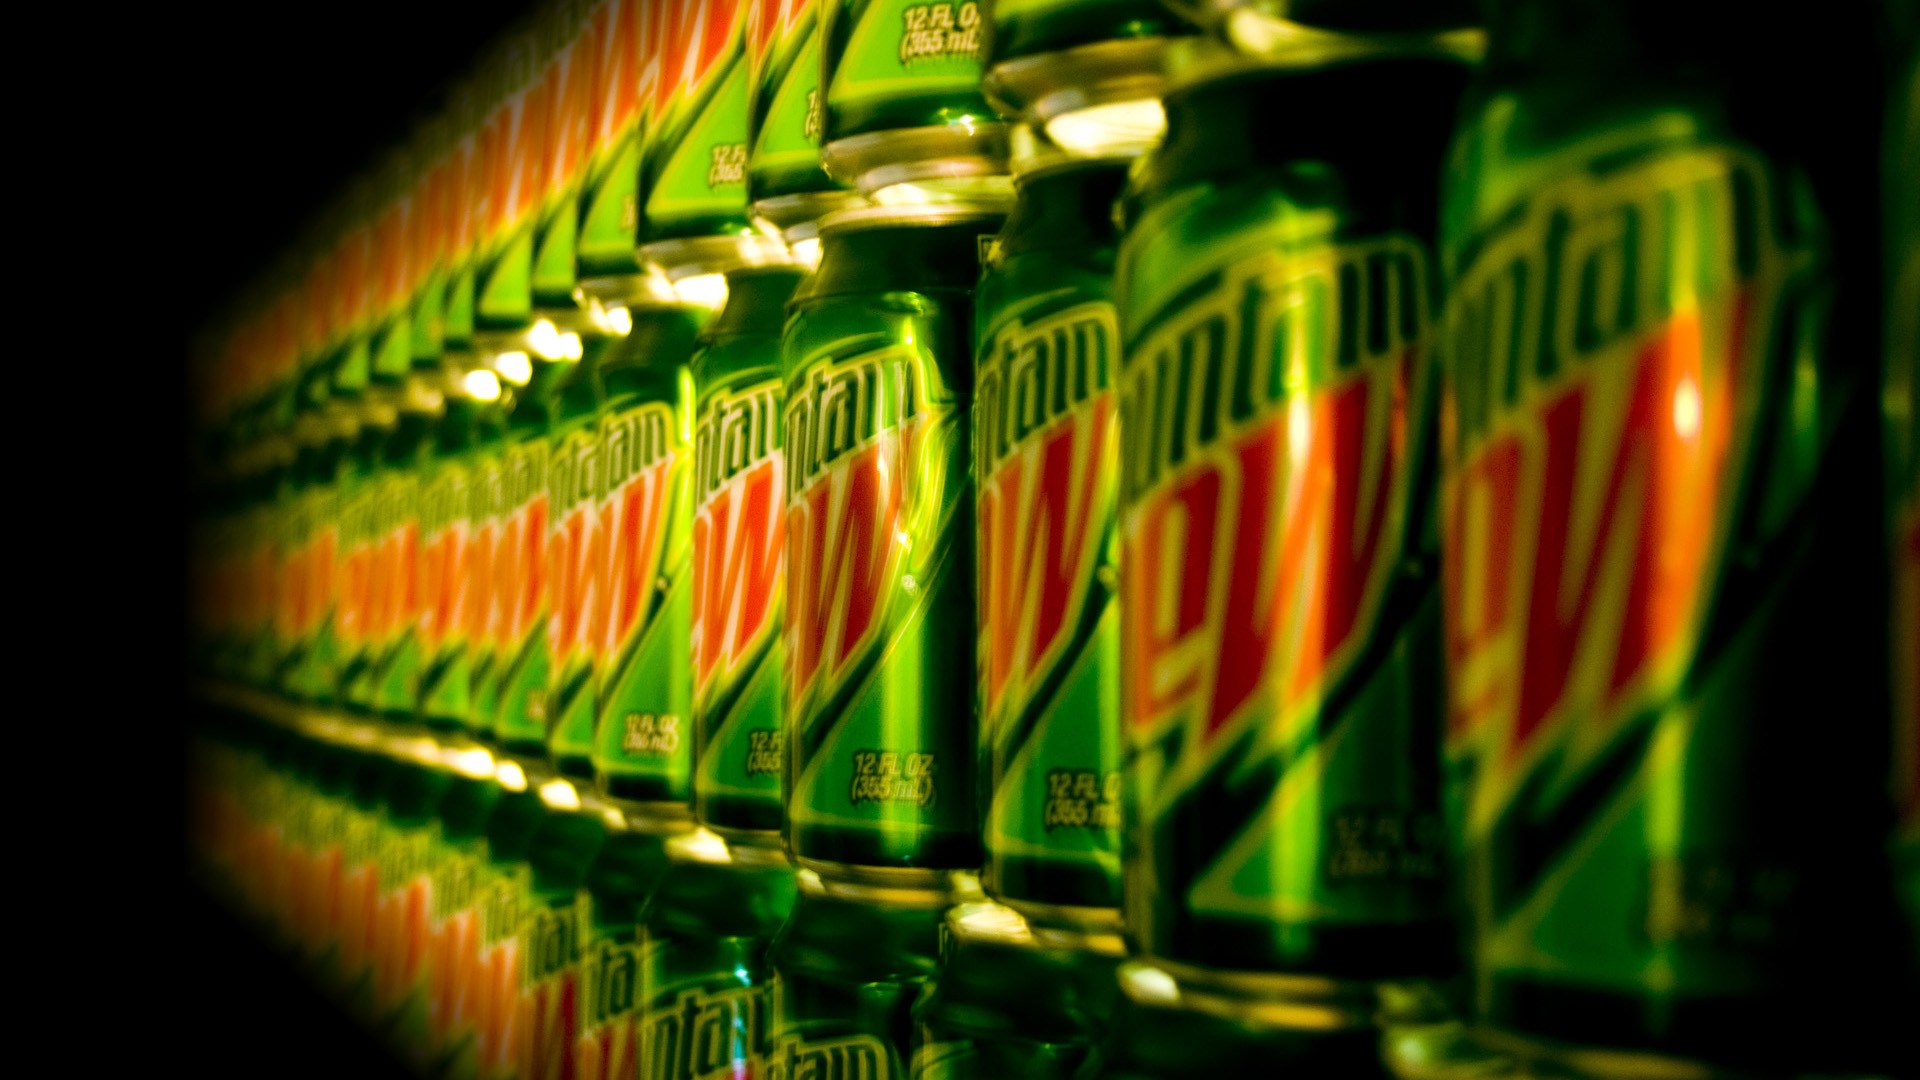 General 1920x1080 Mountain Dew can logo reflection metal black red green